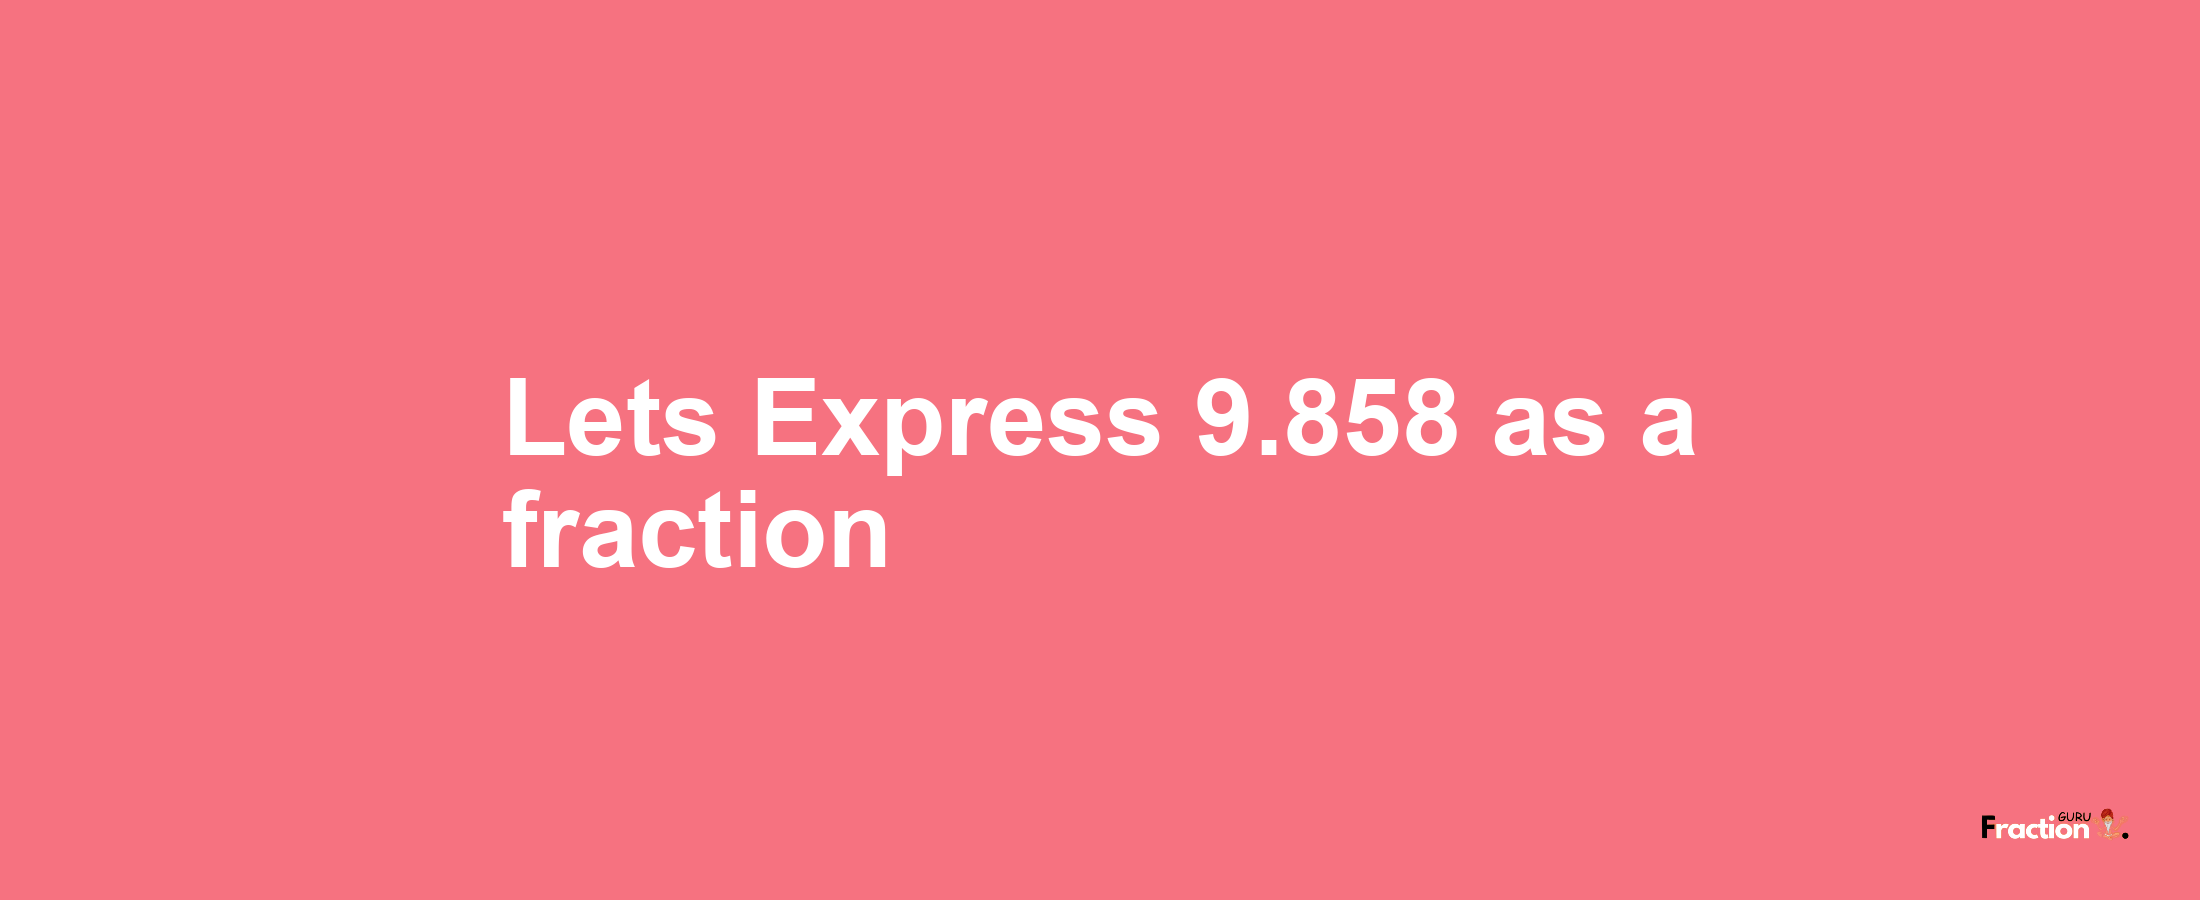 Lets Express 9.858 as afraction